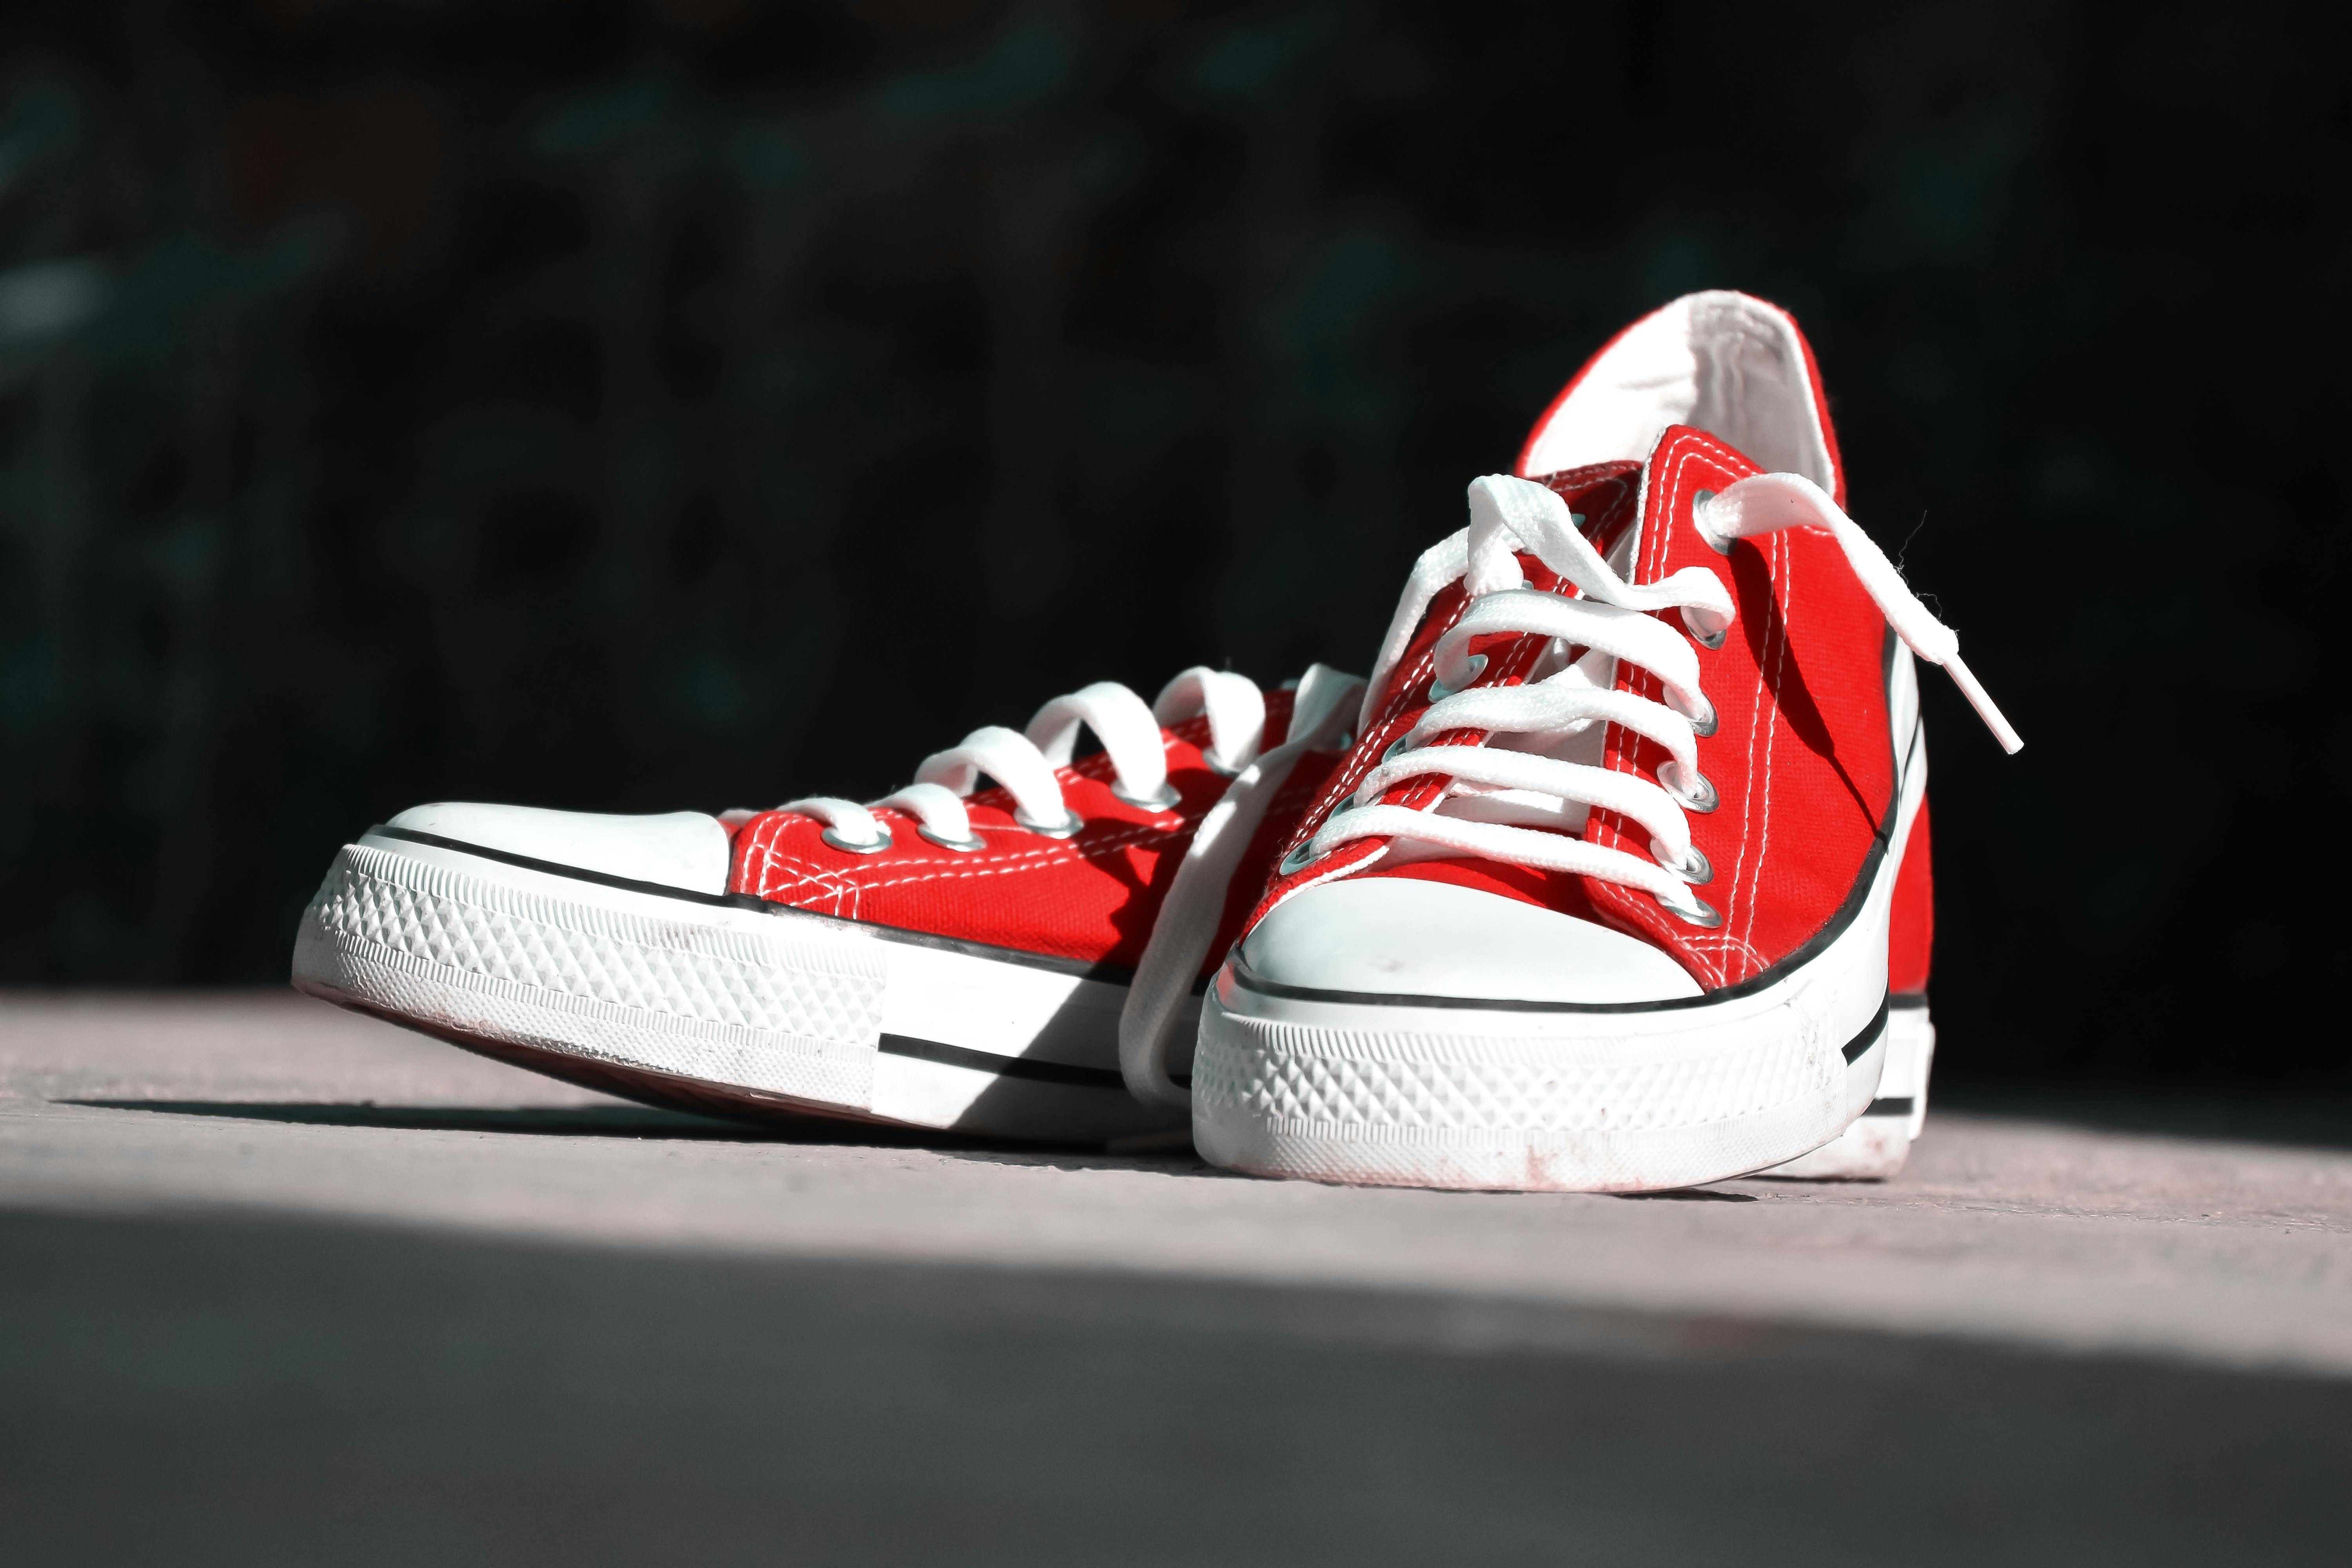 A pair of red canvas sneakers